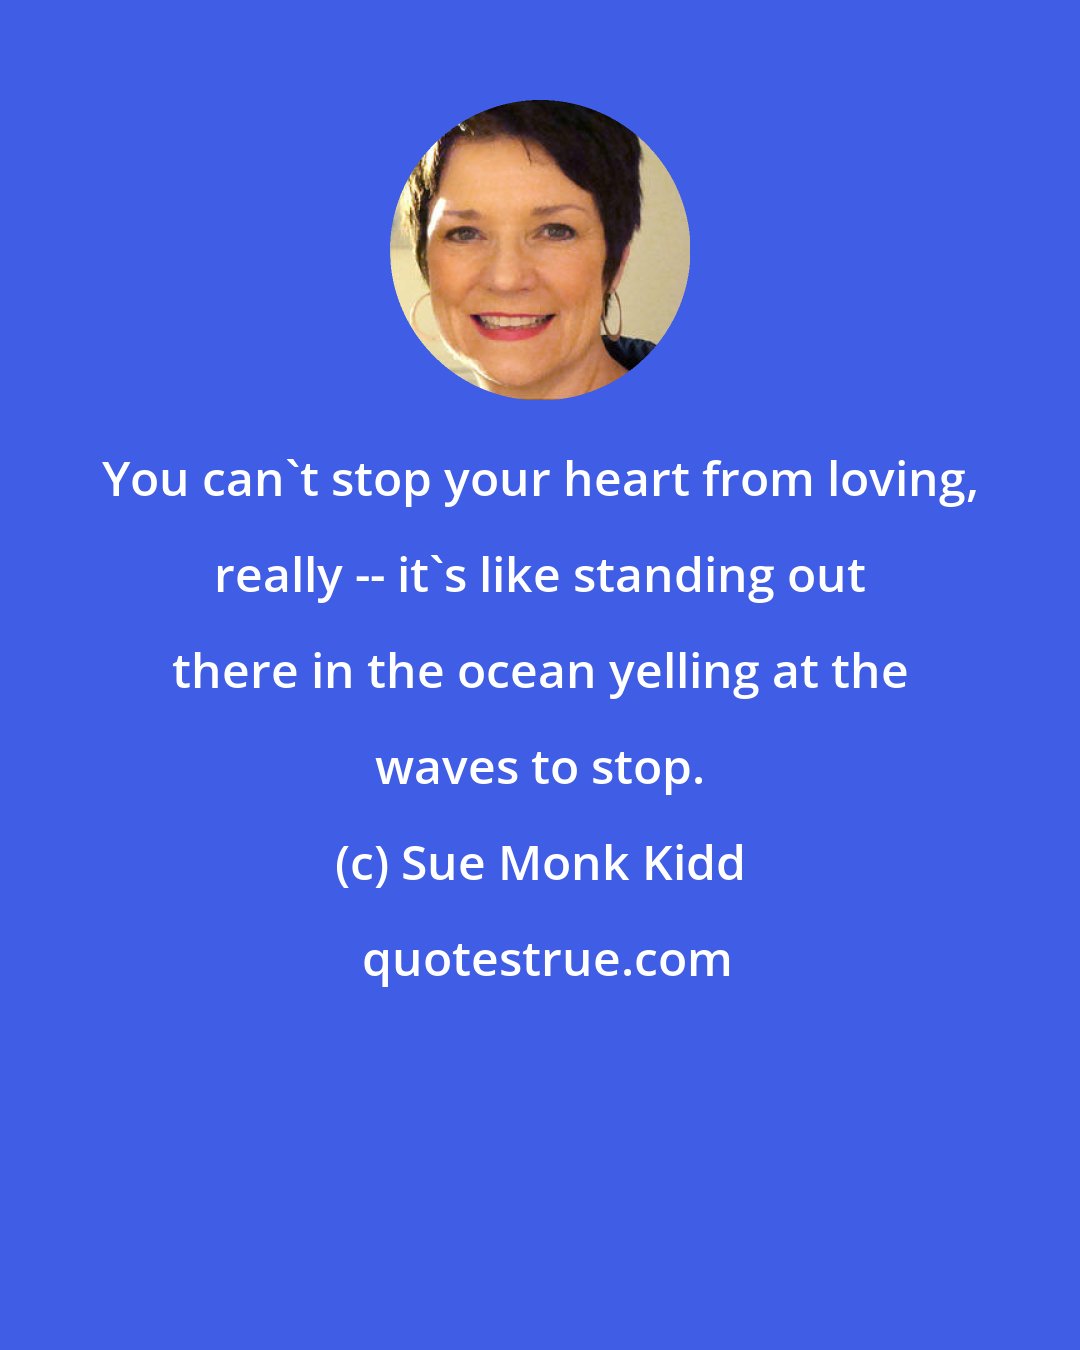 Sue Monk Kidd: You can't stop your heart from loving, really -- it's like standing out there in the ocean yelling at the waves to stop.